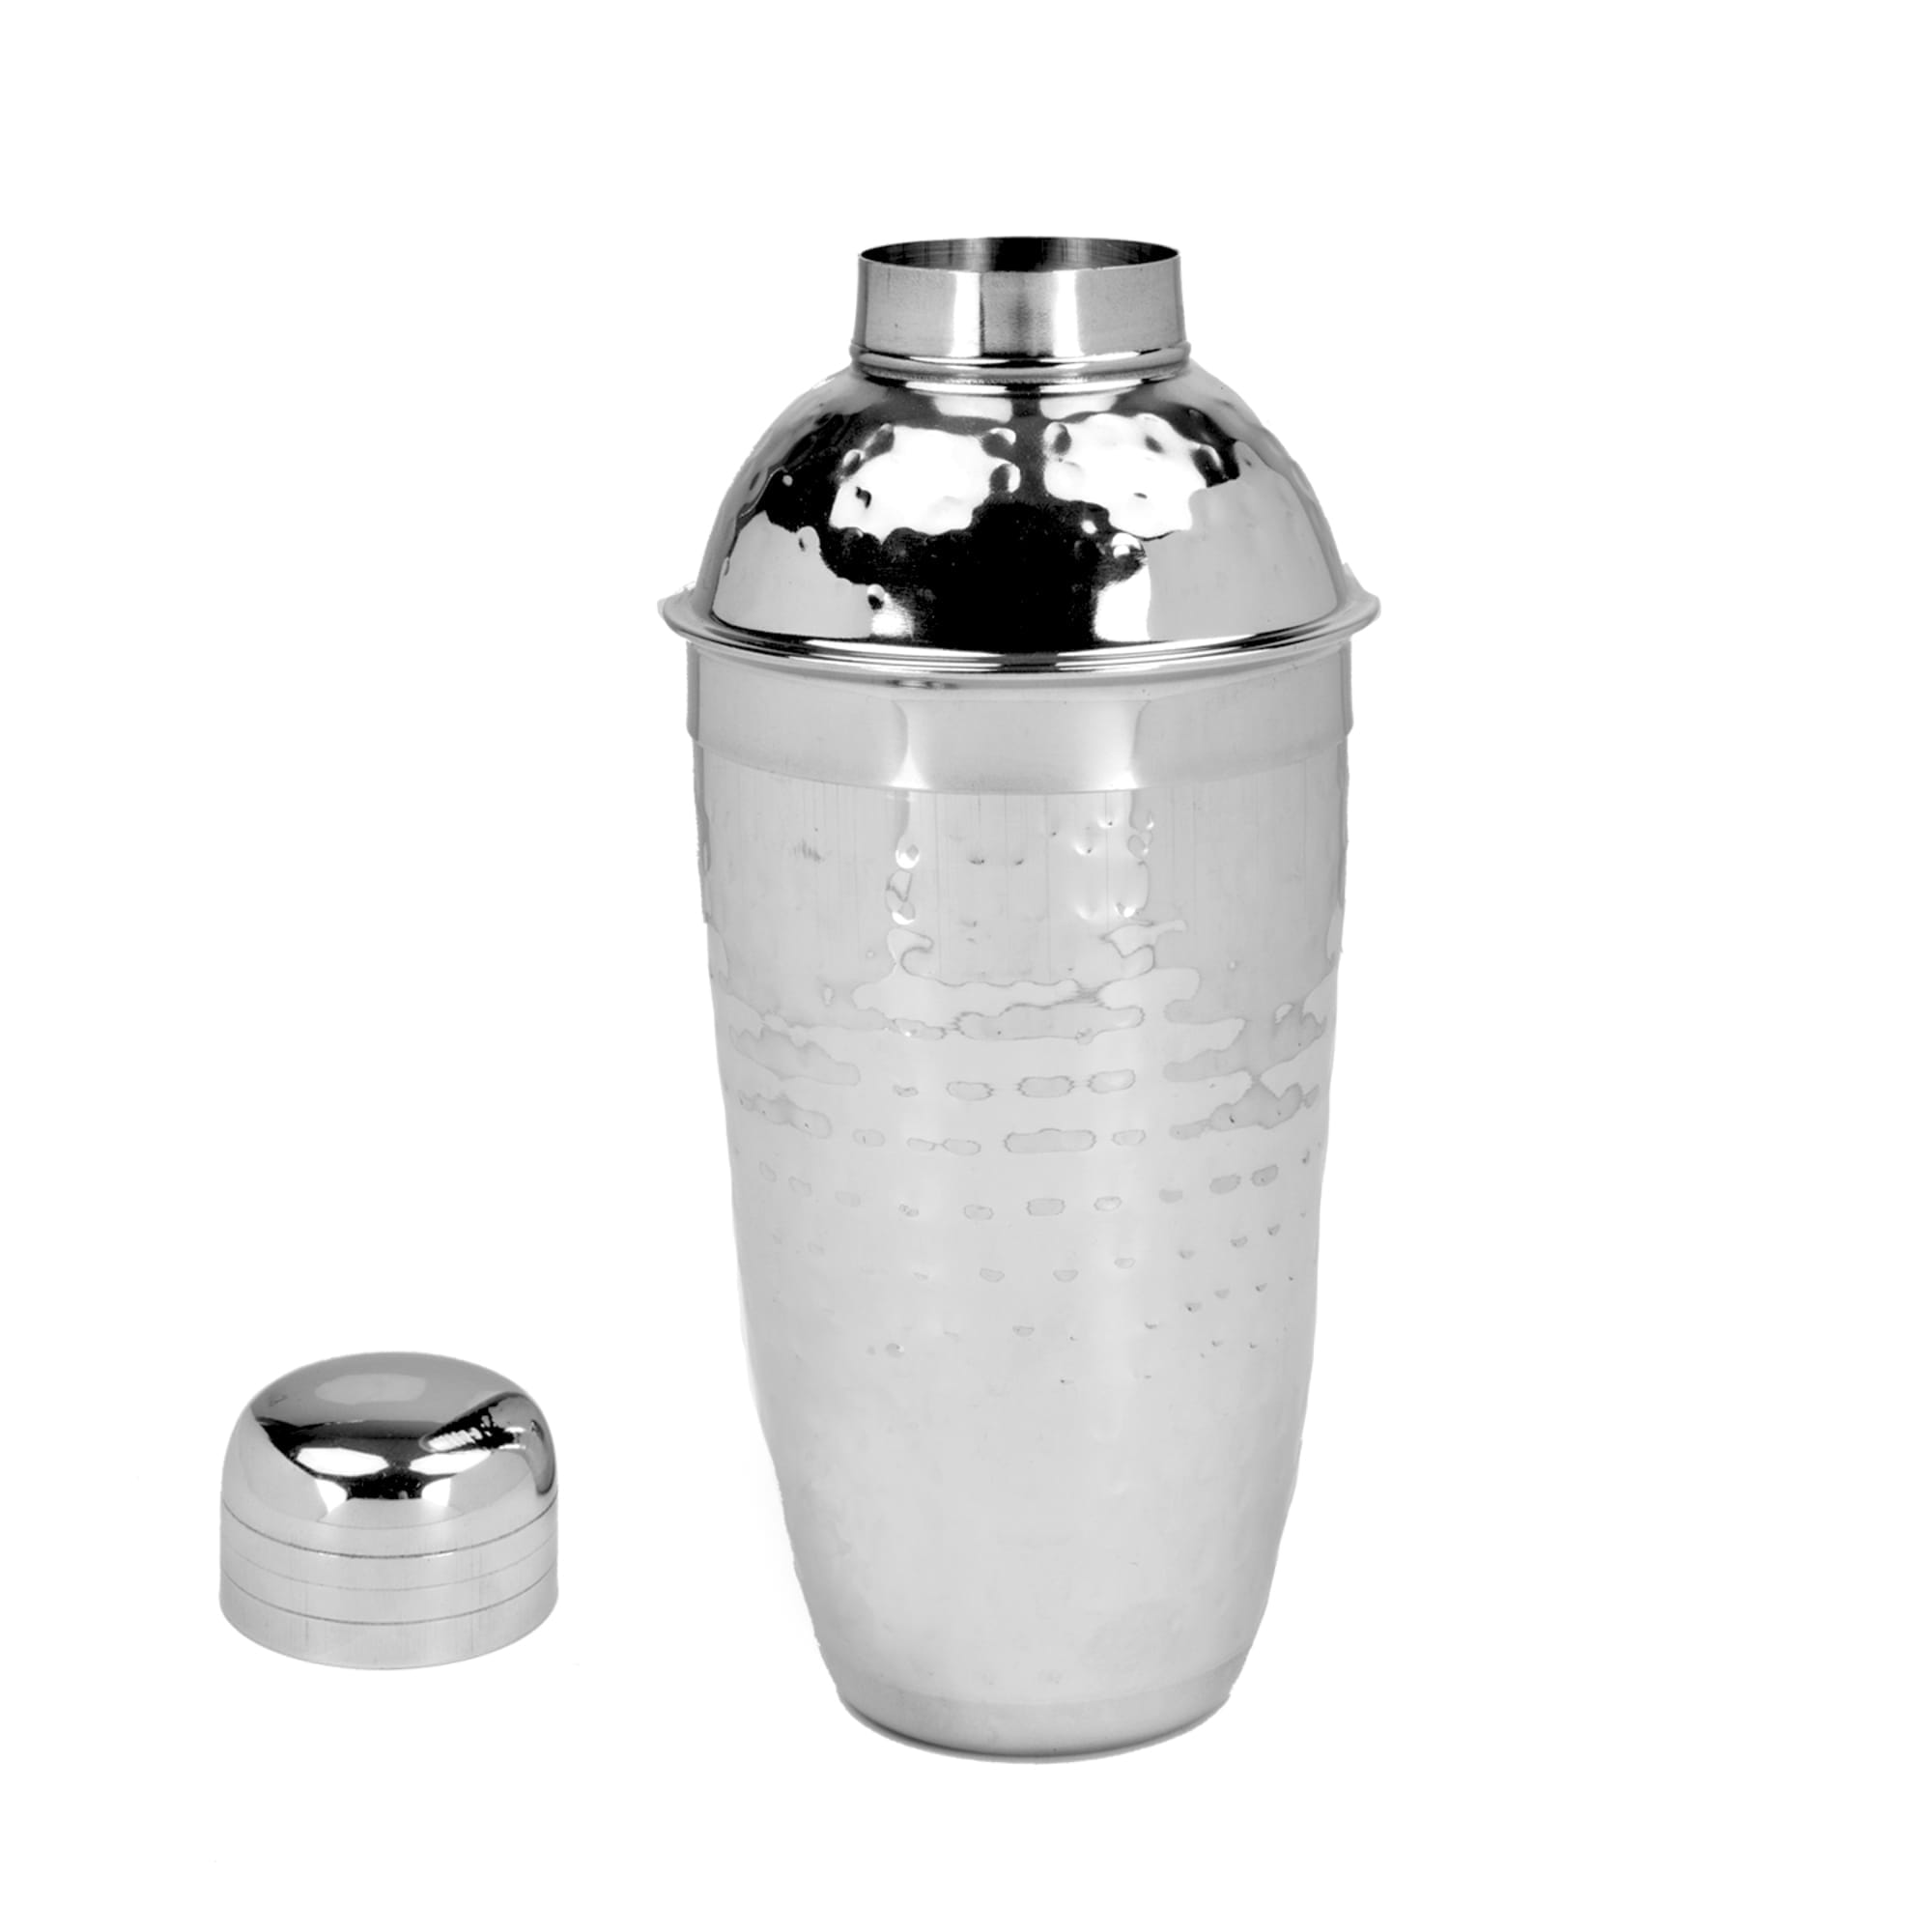 Home Basics Hammered Stainless Steel 750 ml Cocktail Shaker $5.00 EACH, CASE PACK OF 12